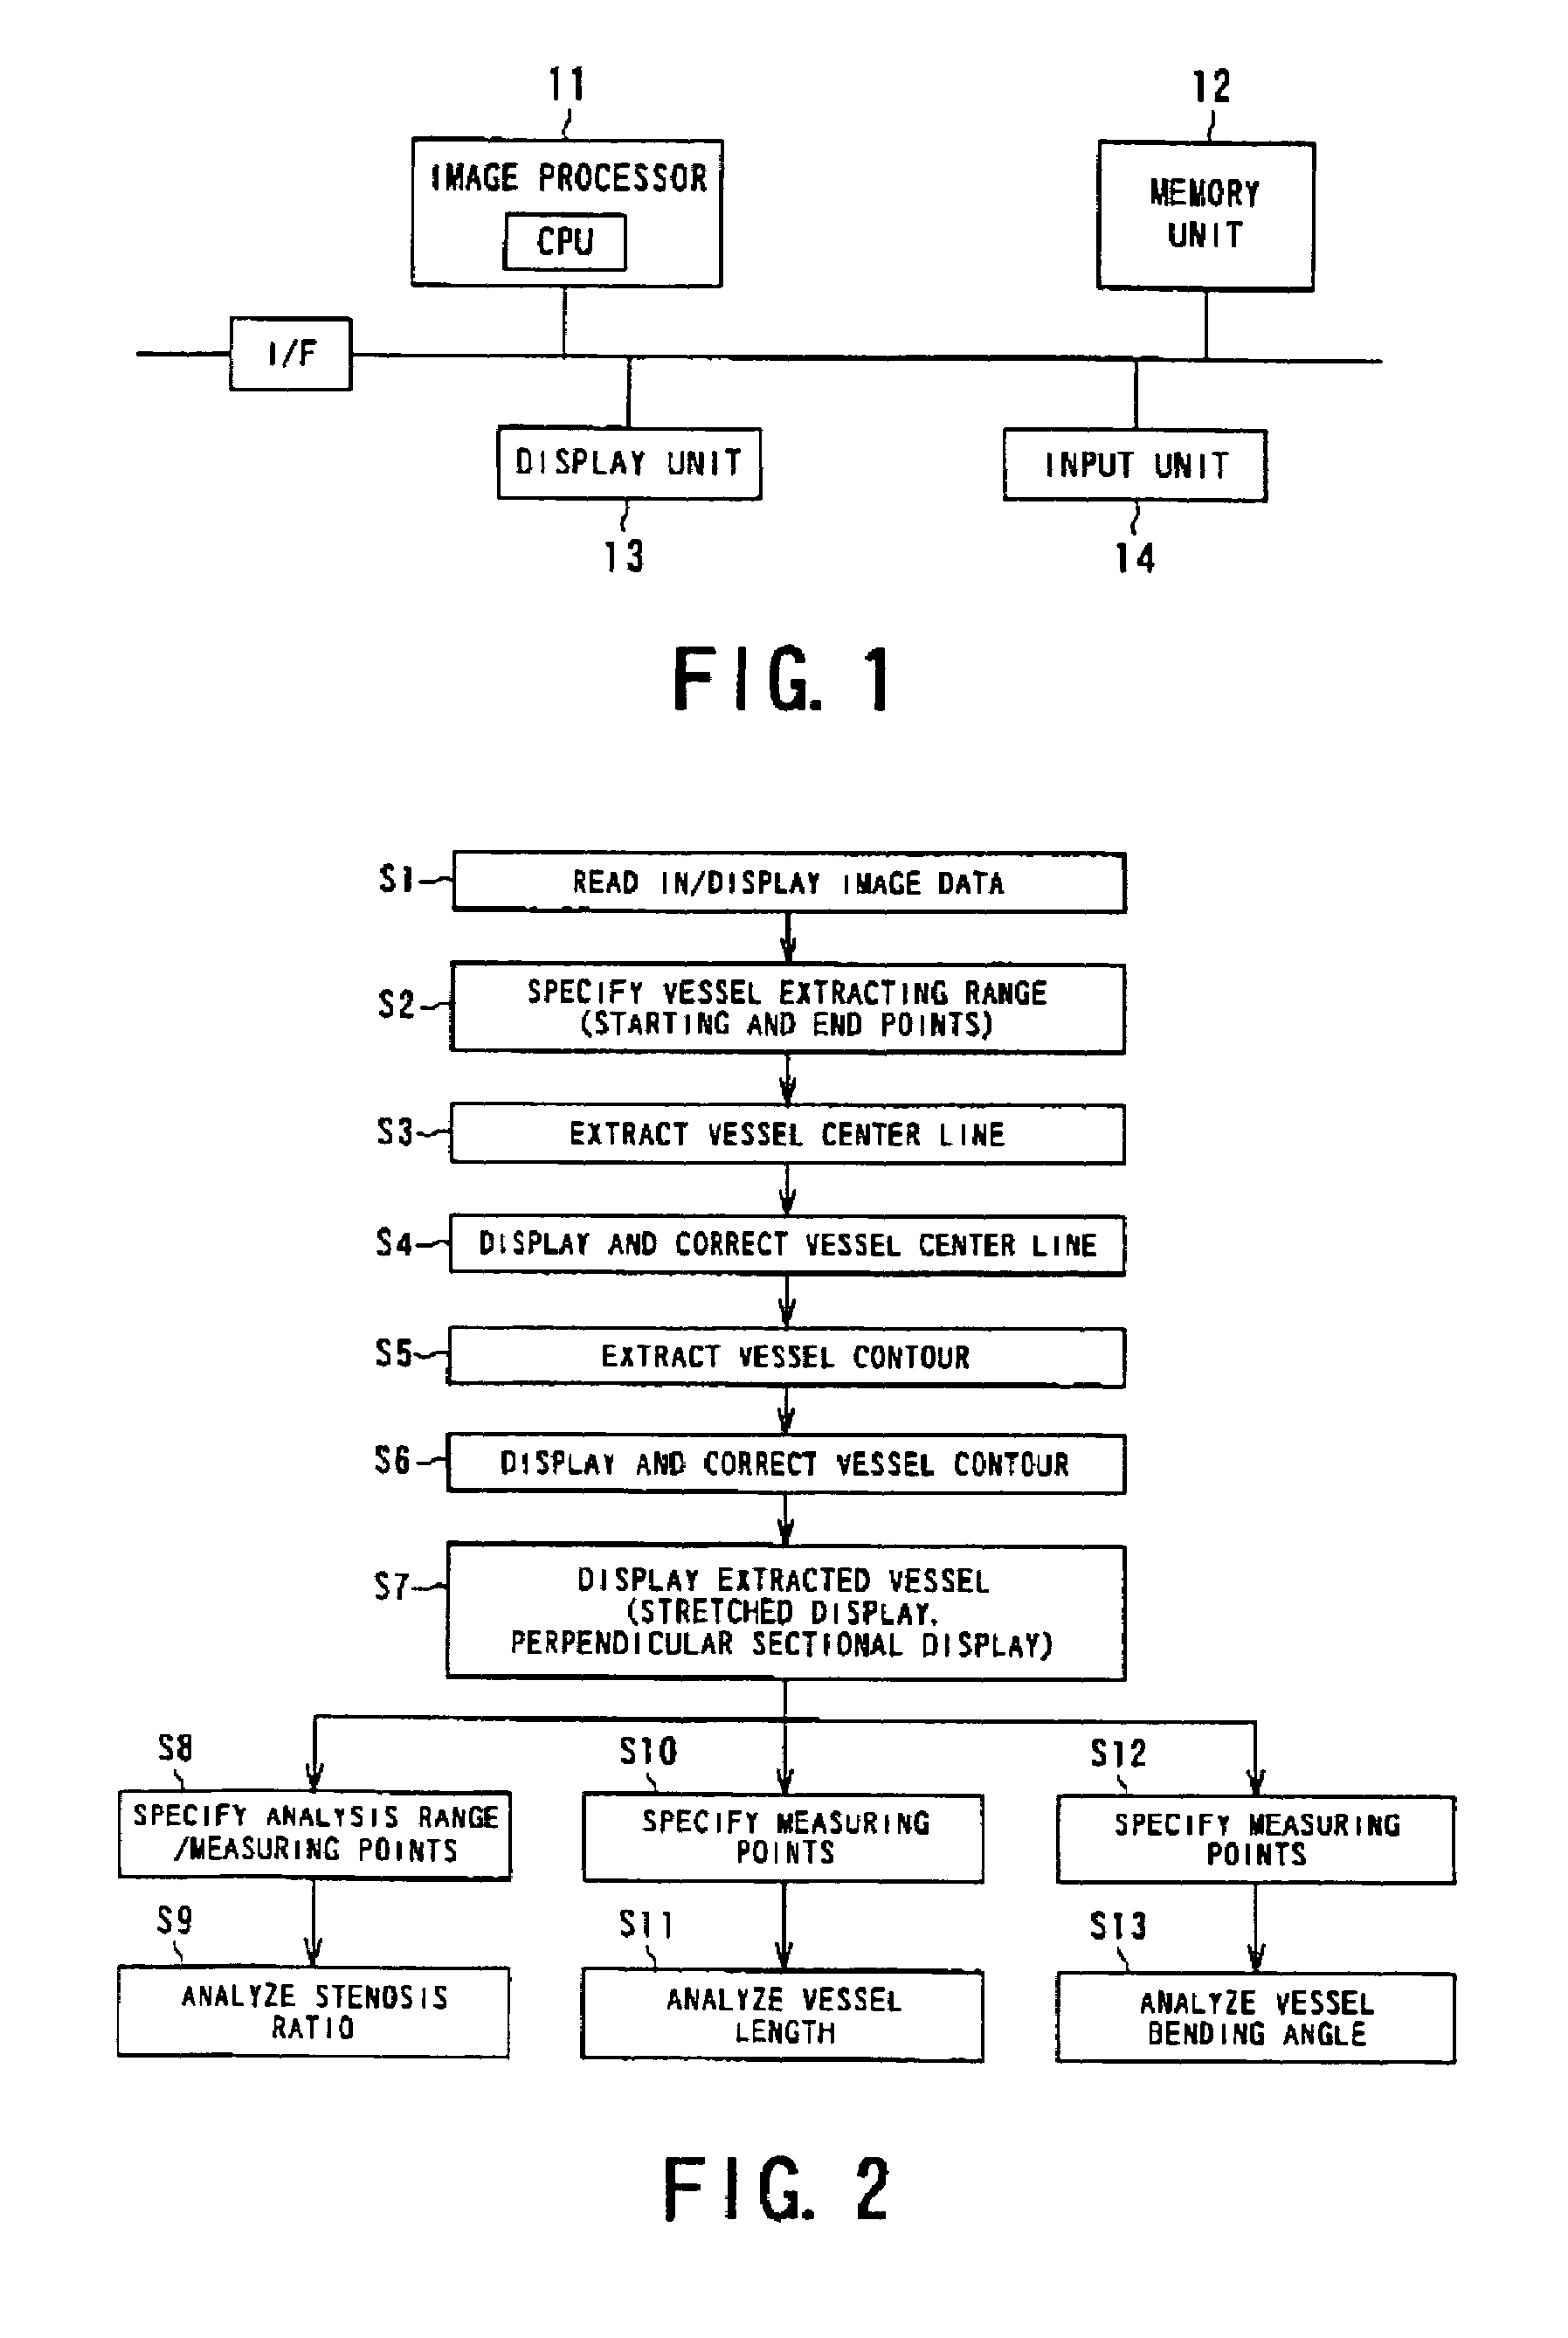 Processor for analyzing tubular structure such as blood vessels